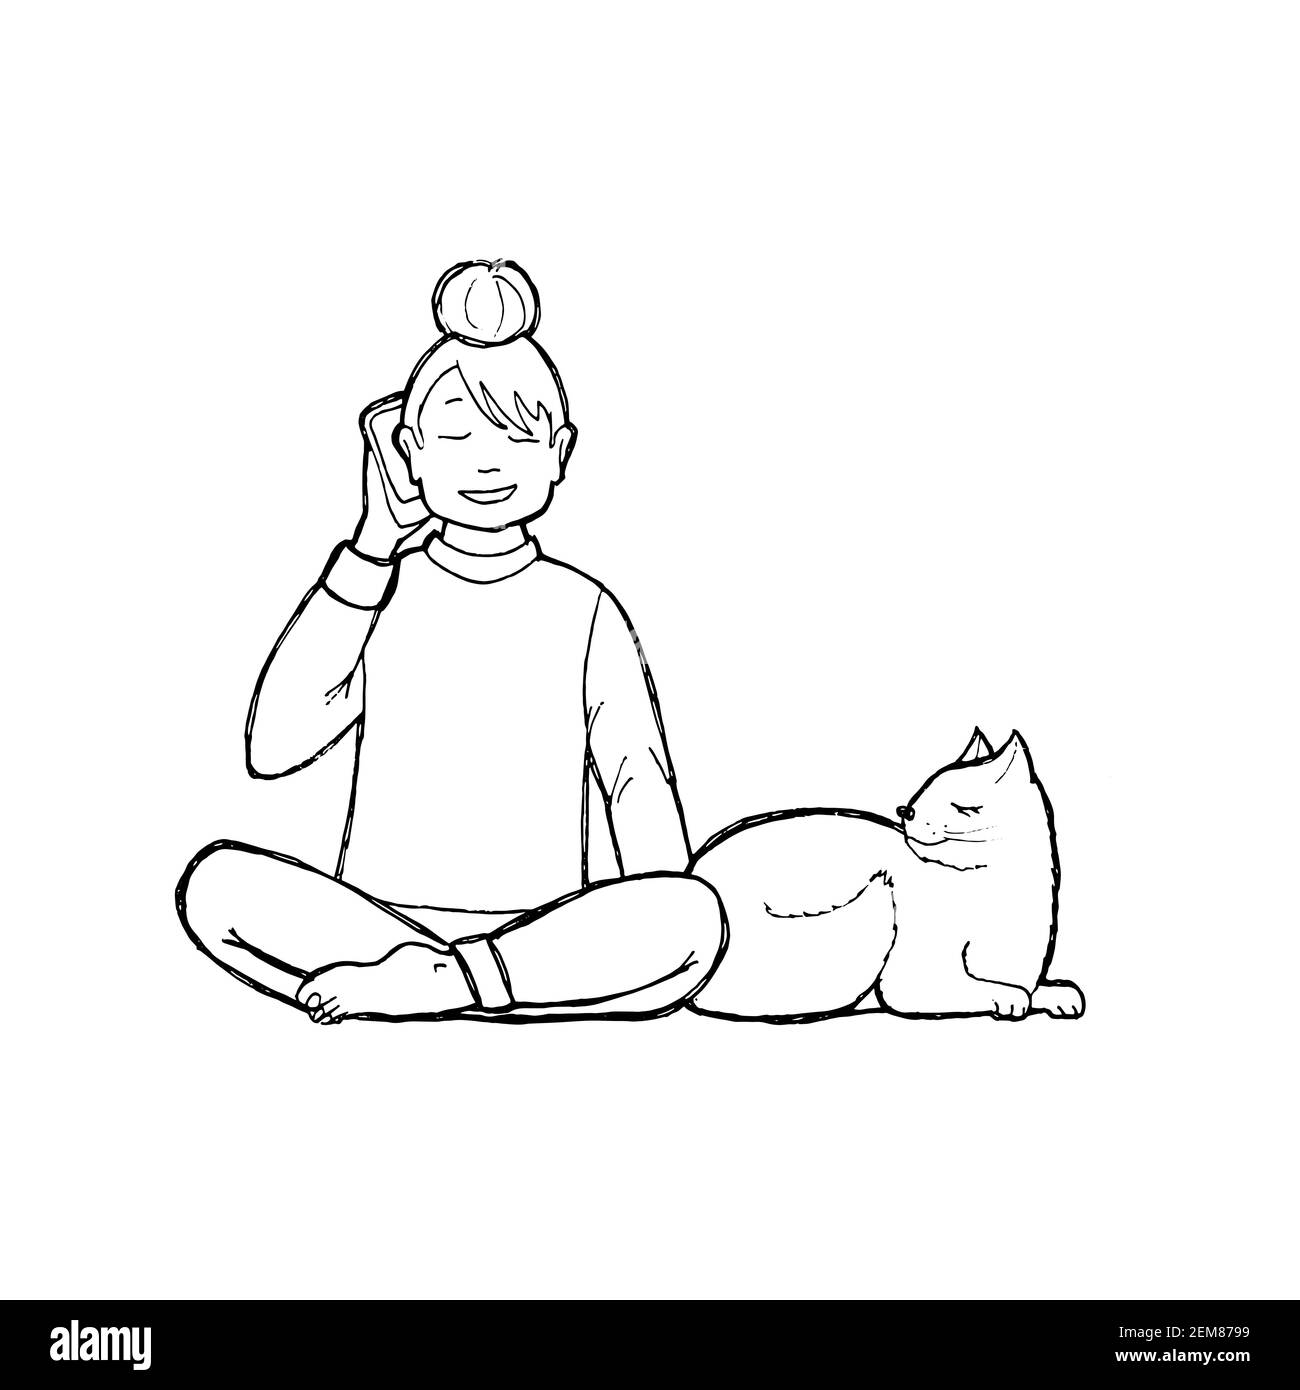 Girl working from home or remotely in house with phone and cat. Hand drawing sketch can be used in greeting cards, posters, flyers, banners, logos, web design, etc. Vector illustration. EPS10 Stock Vector